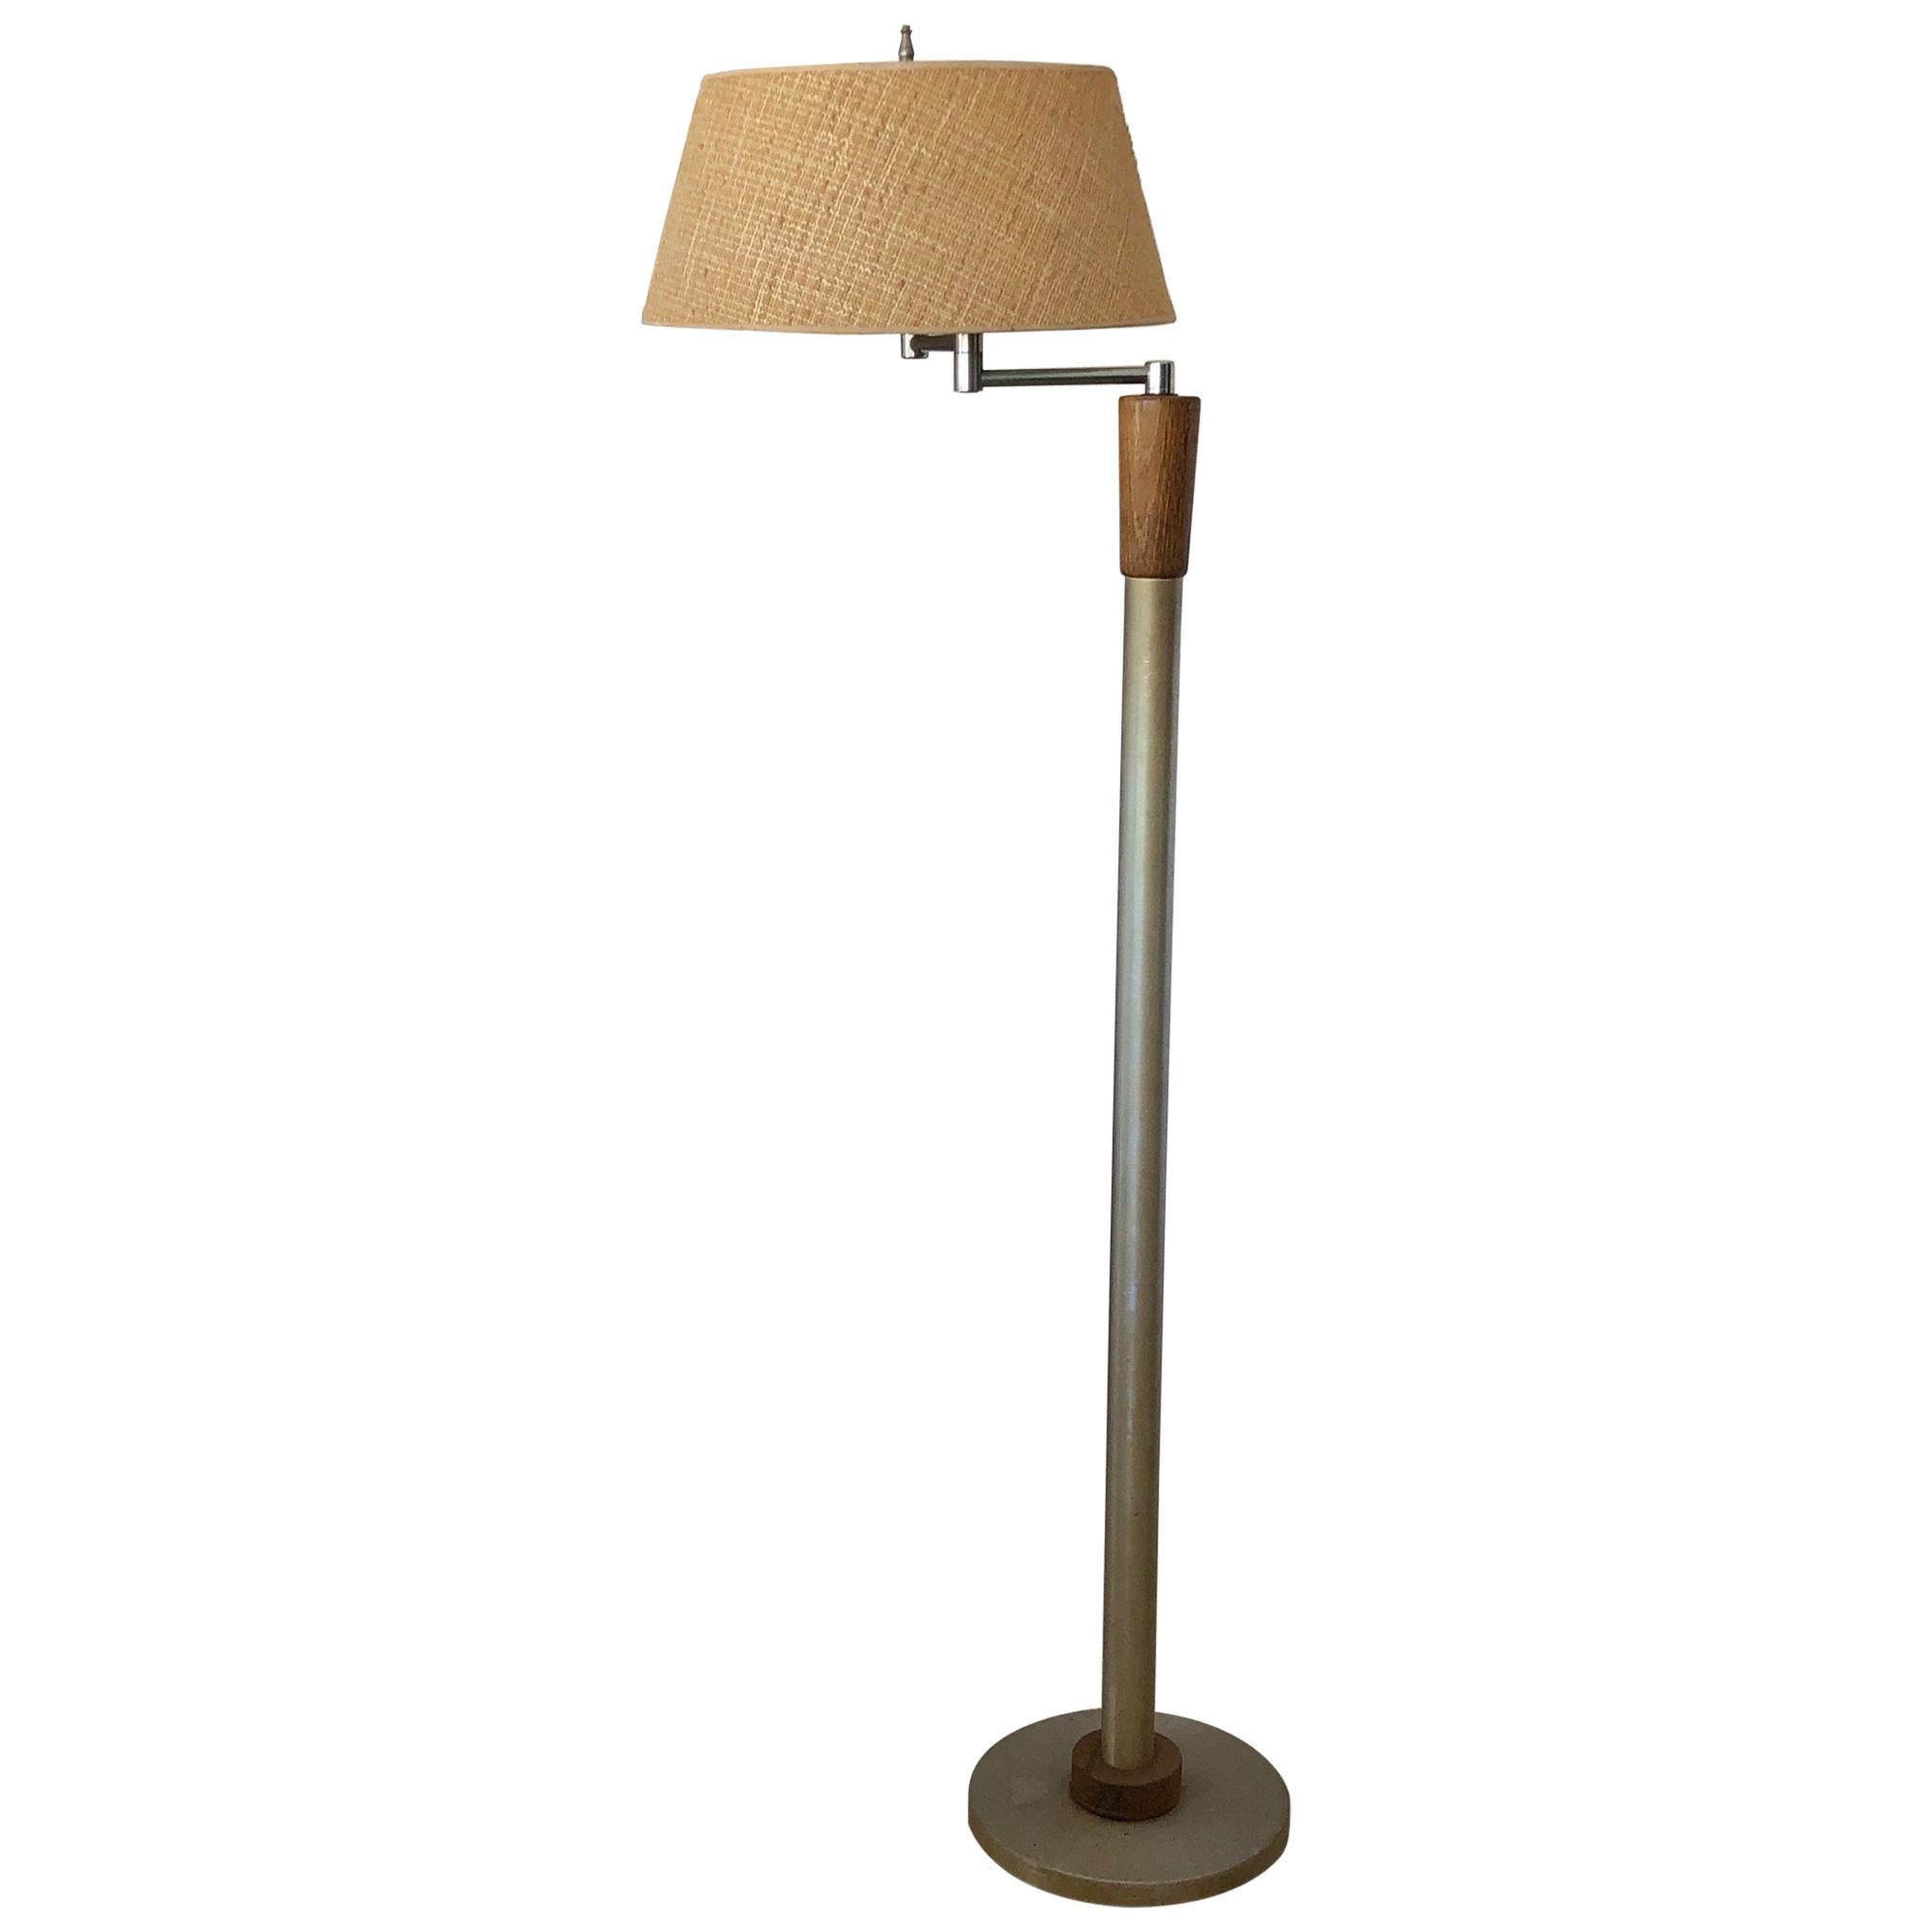 Modernist Articulated Floor Lamp with Original Shade